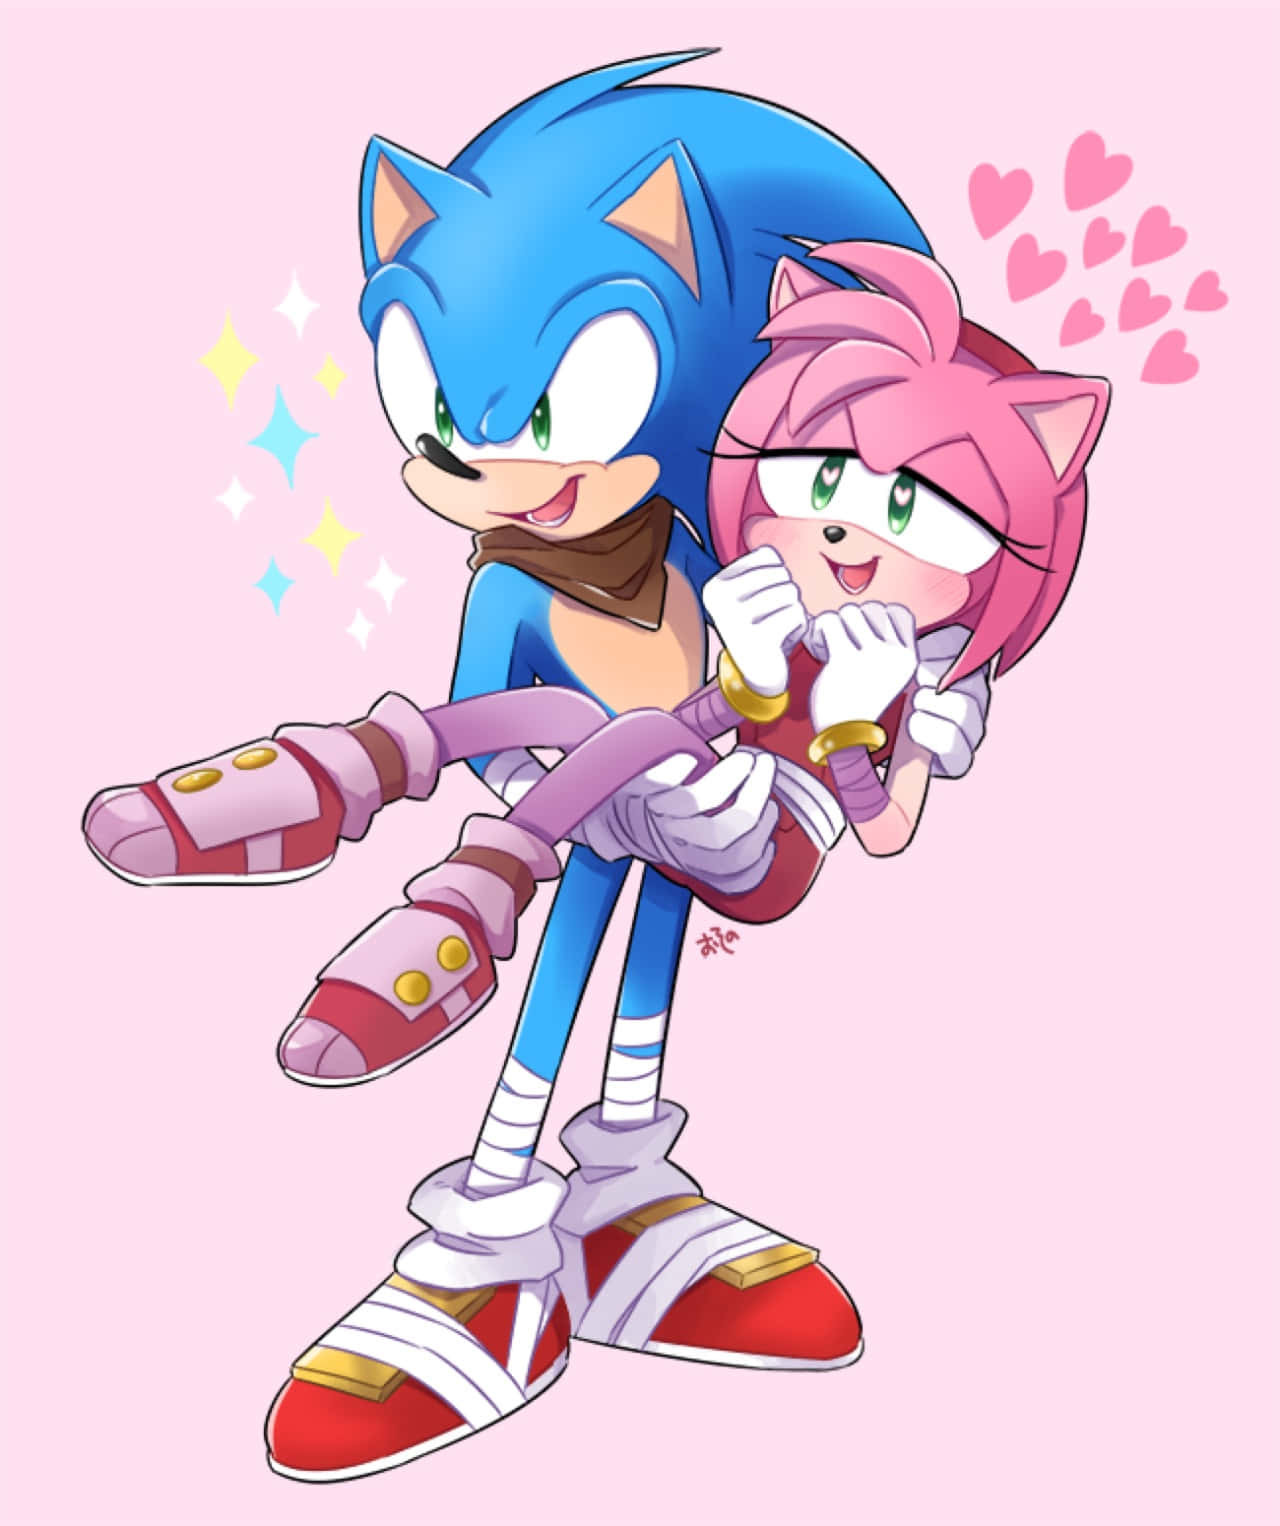 Sonic and Amy: A Moment Together Wallpaper